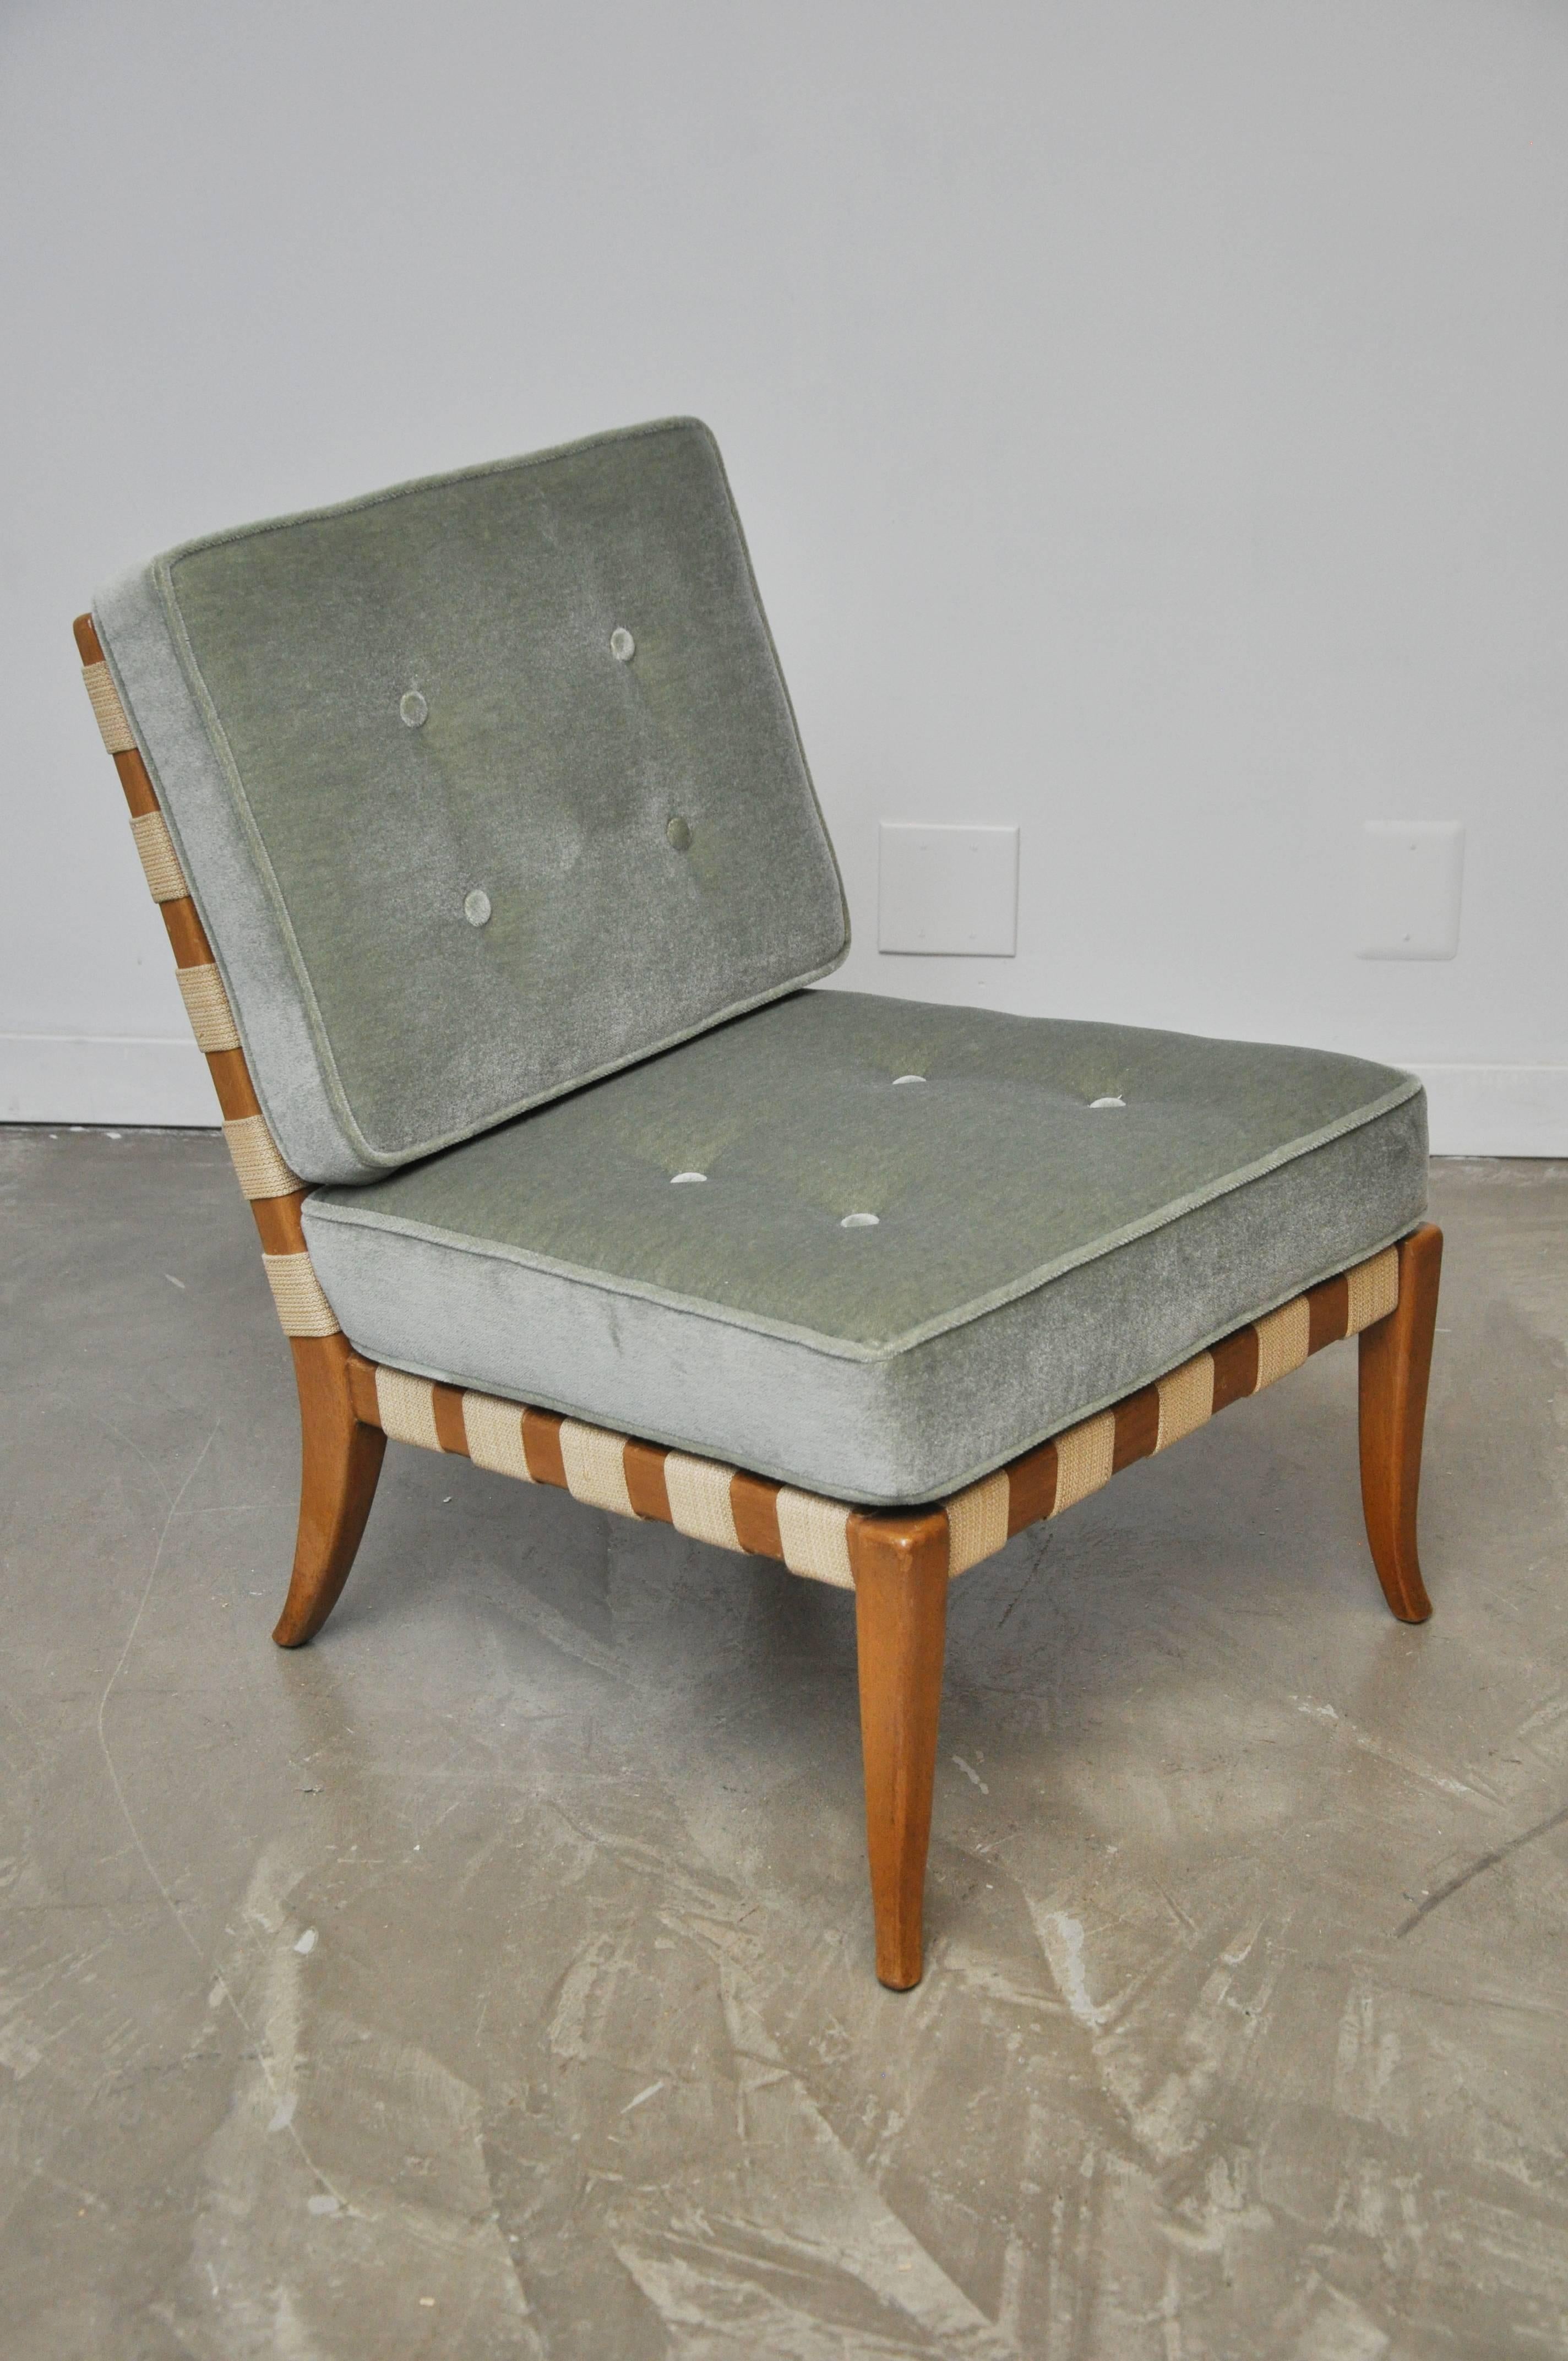 Rare strap slipper chair by T.H. Robsjohn-Gibbings. Original strap webbing over wood frame with new mohair cushions.